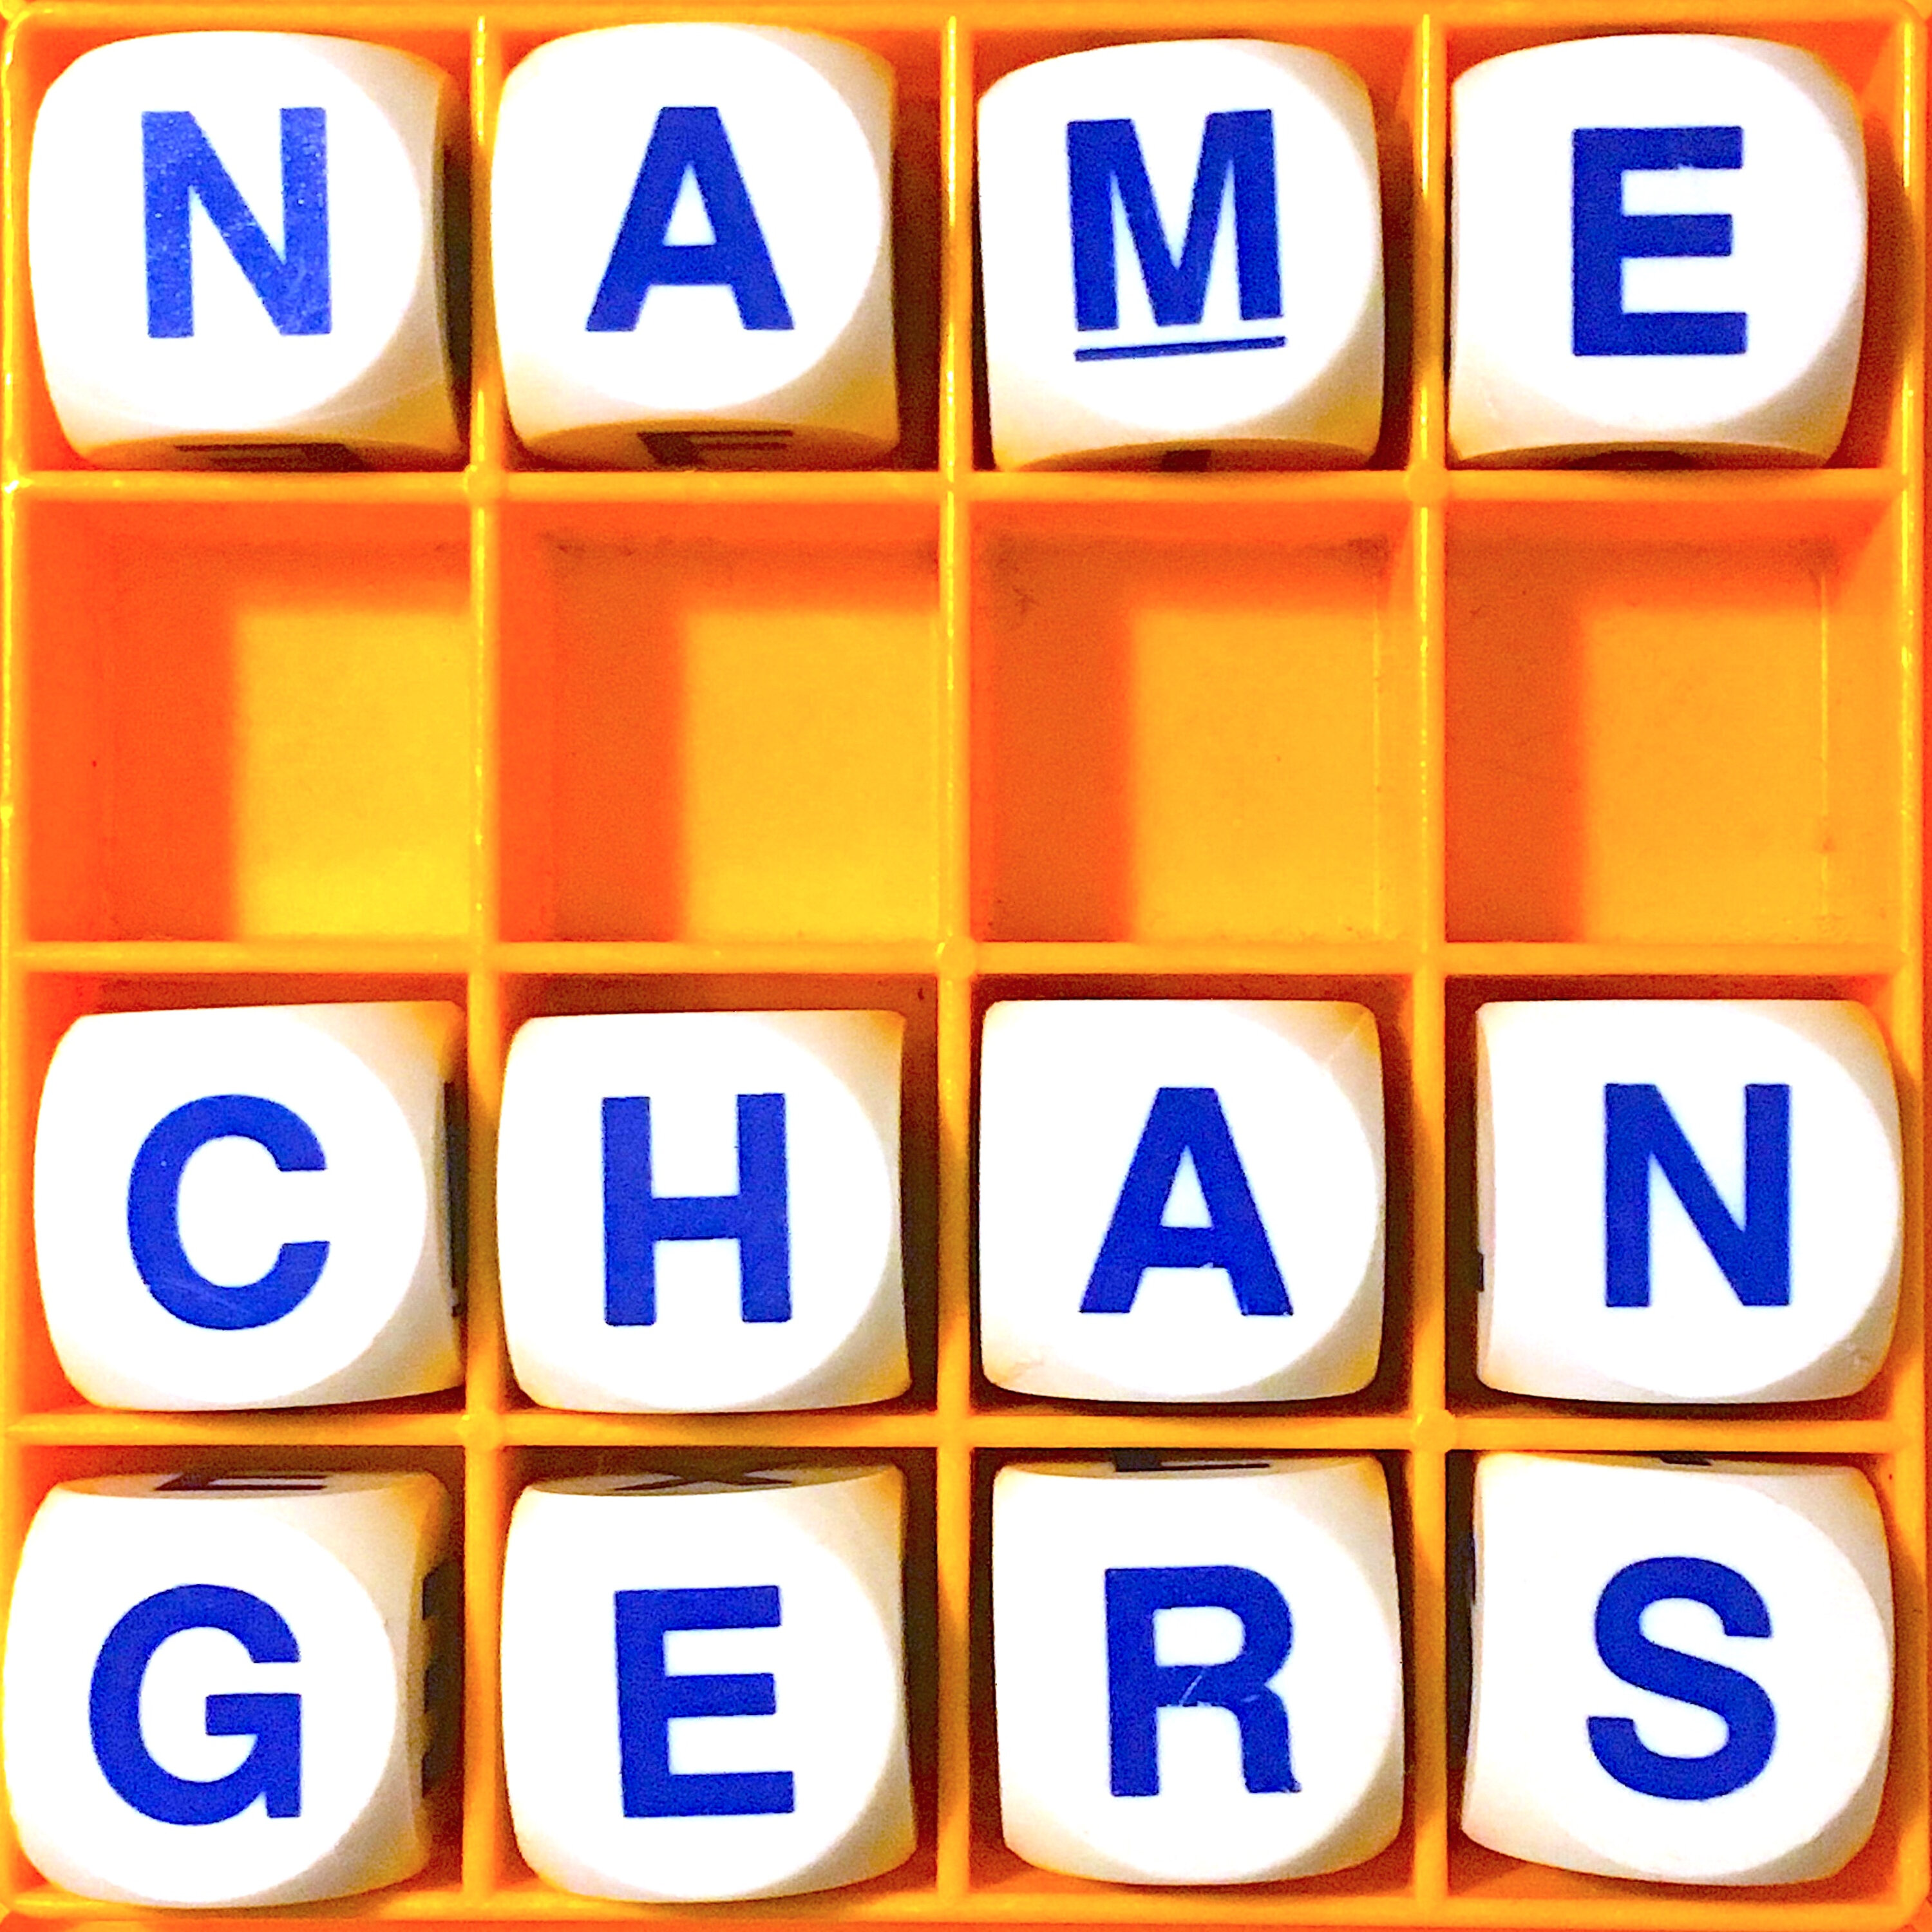 Thumbnail for "88. Name Changers".